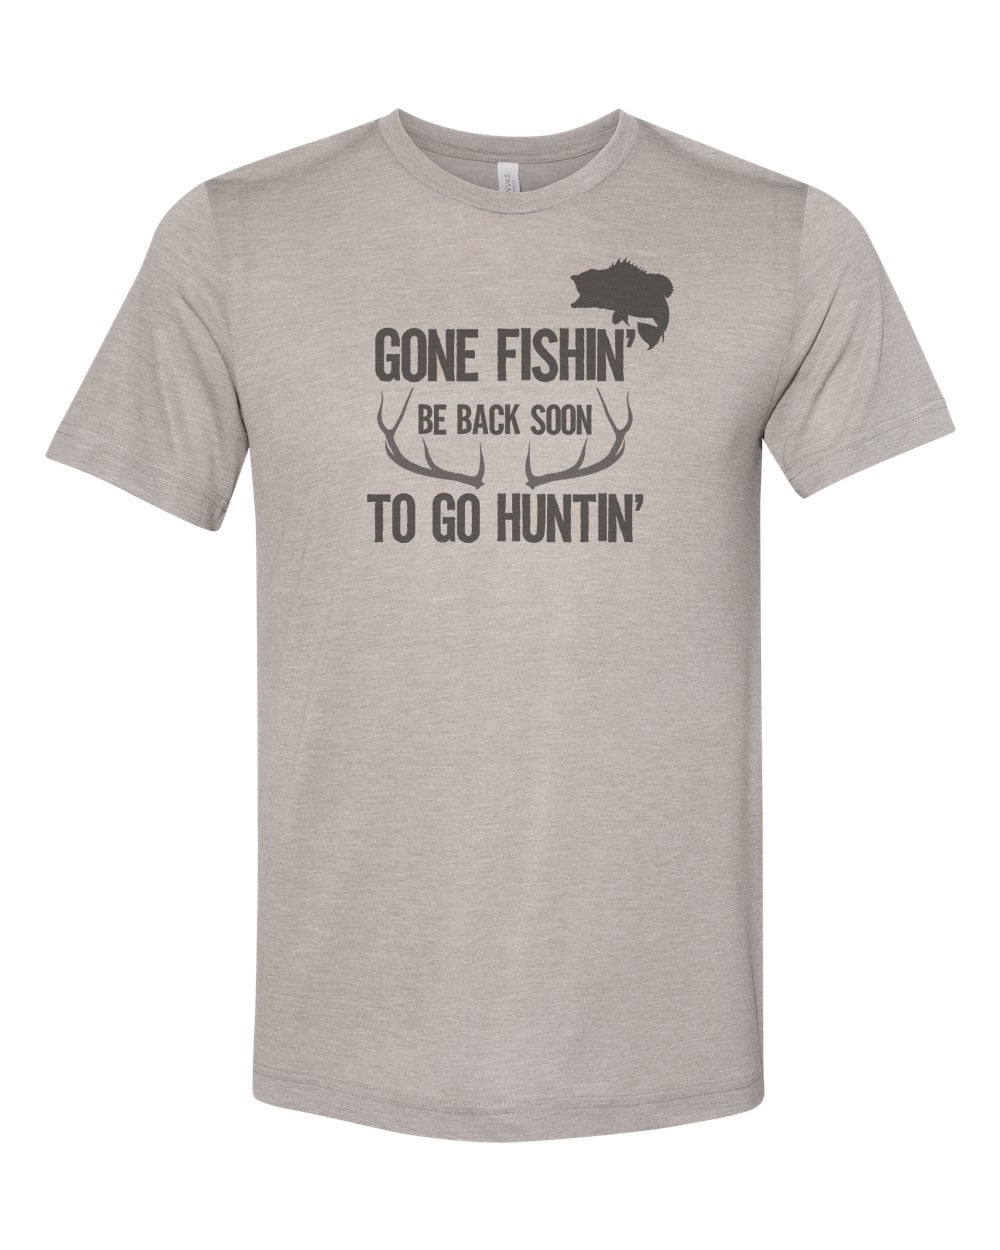 Hunting And Fishing Shirt, Gone Fishin' Be Back To Soon To Go Huntin',  Sublimation Tee, Fishing Shirt, Hunting Shirt, Dad Tee, Father's Day,  Heather Stone, LARGE 